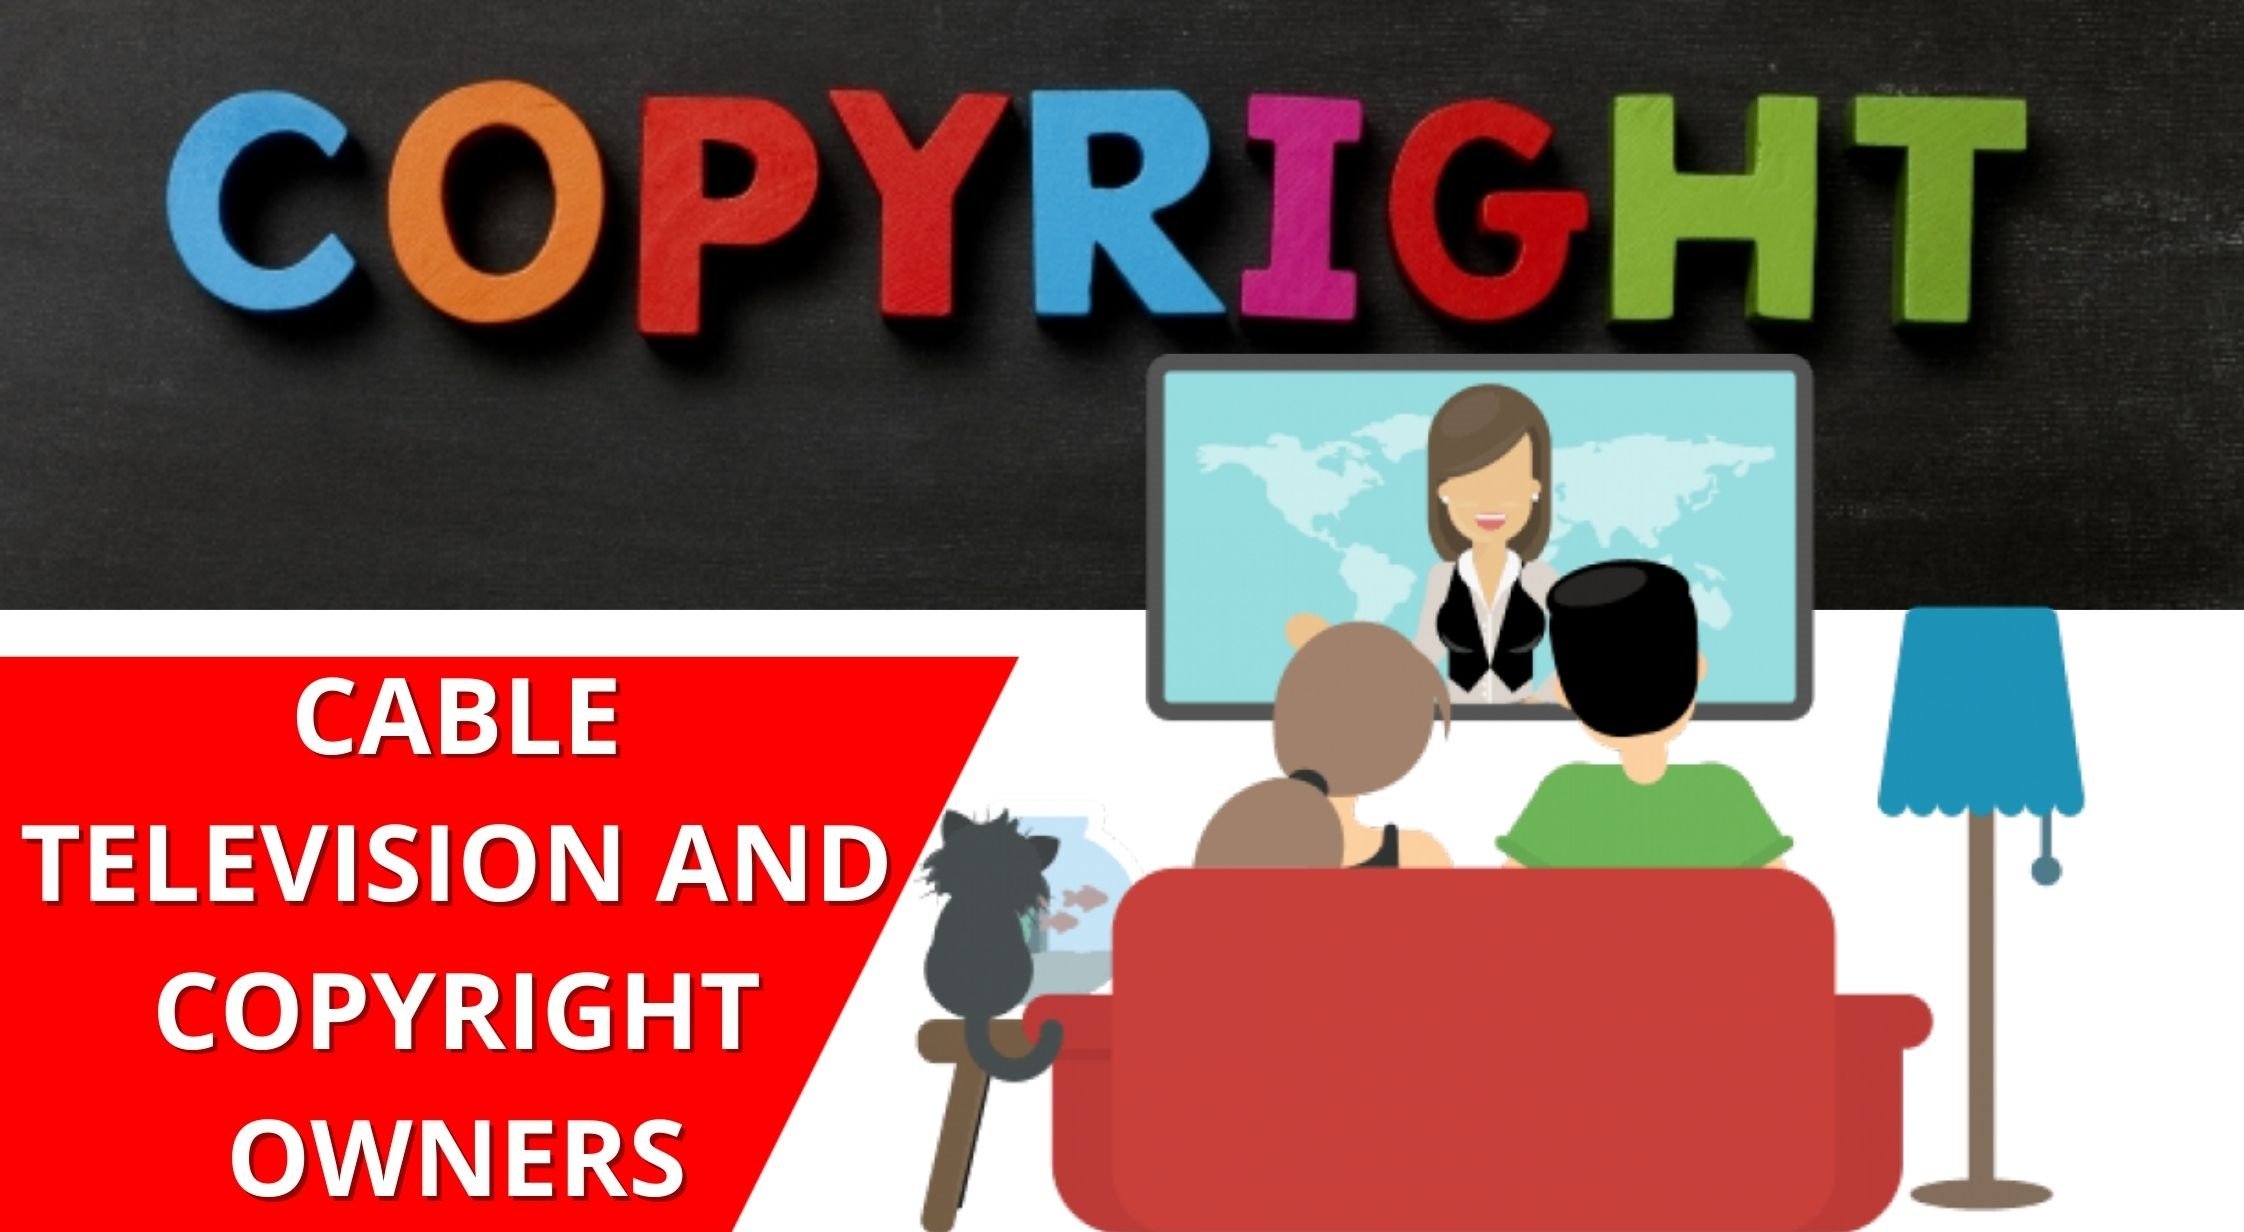 CABLE TELEVISION AND COPYRIGHT OWNERS